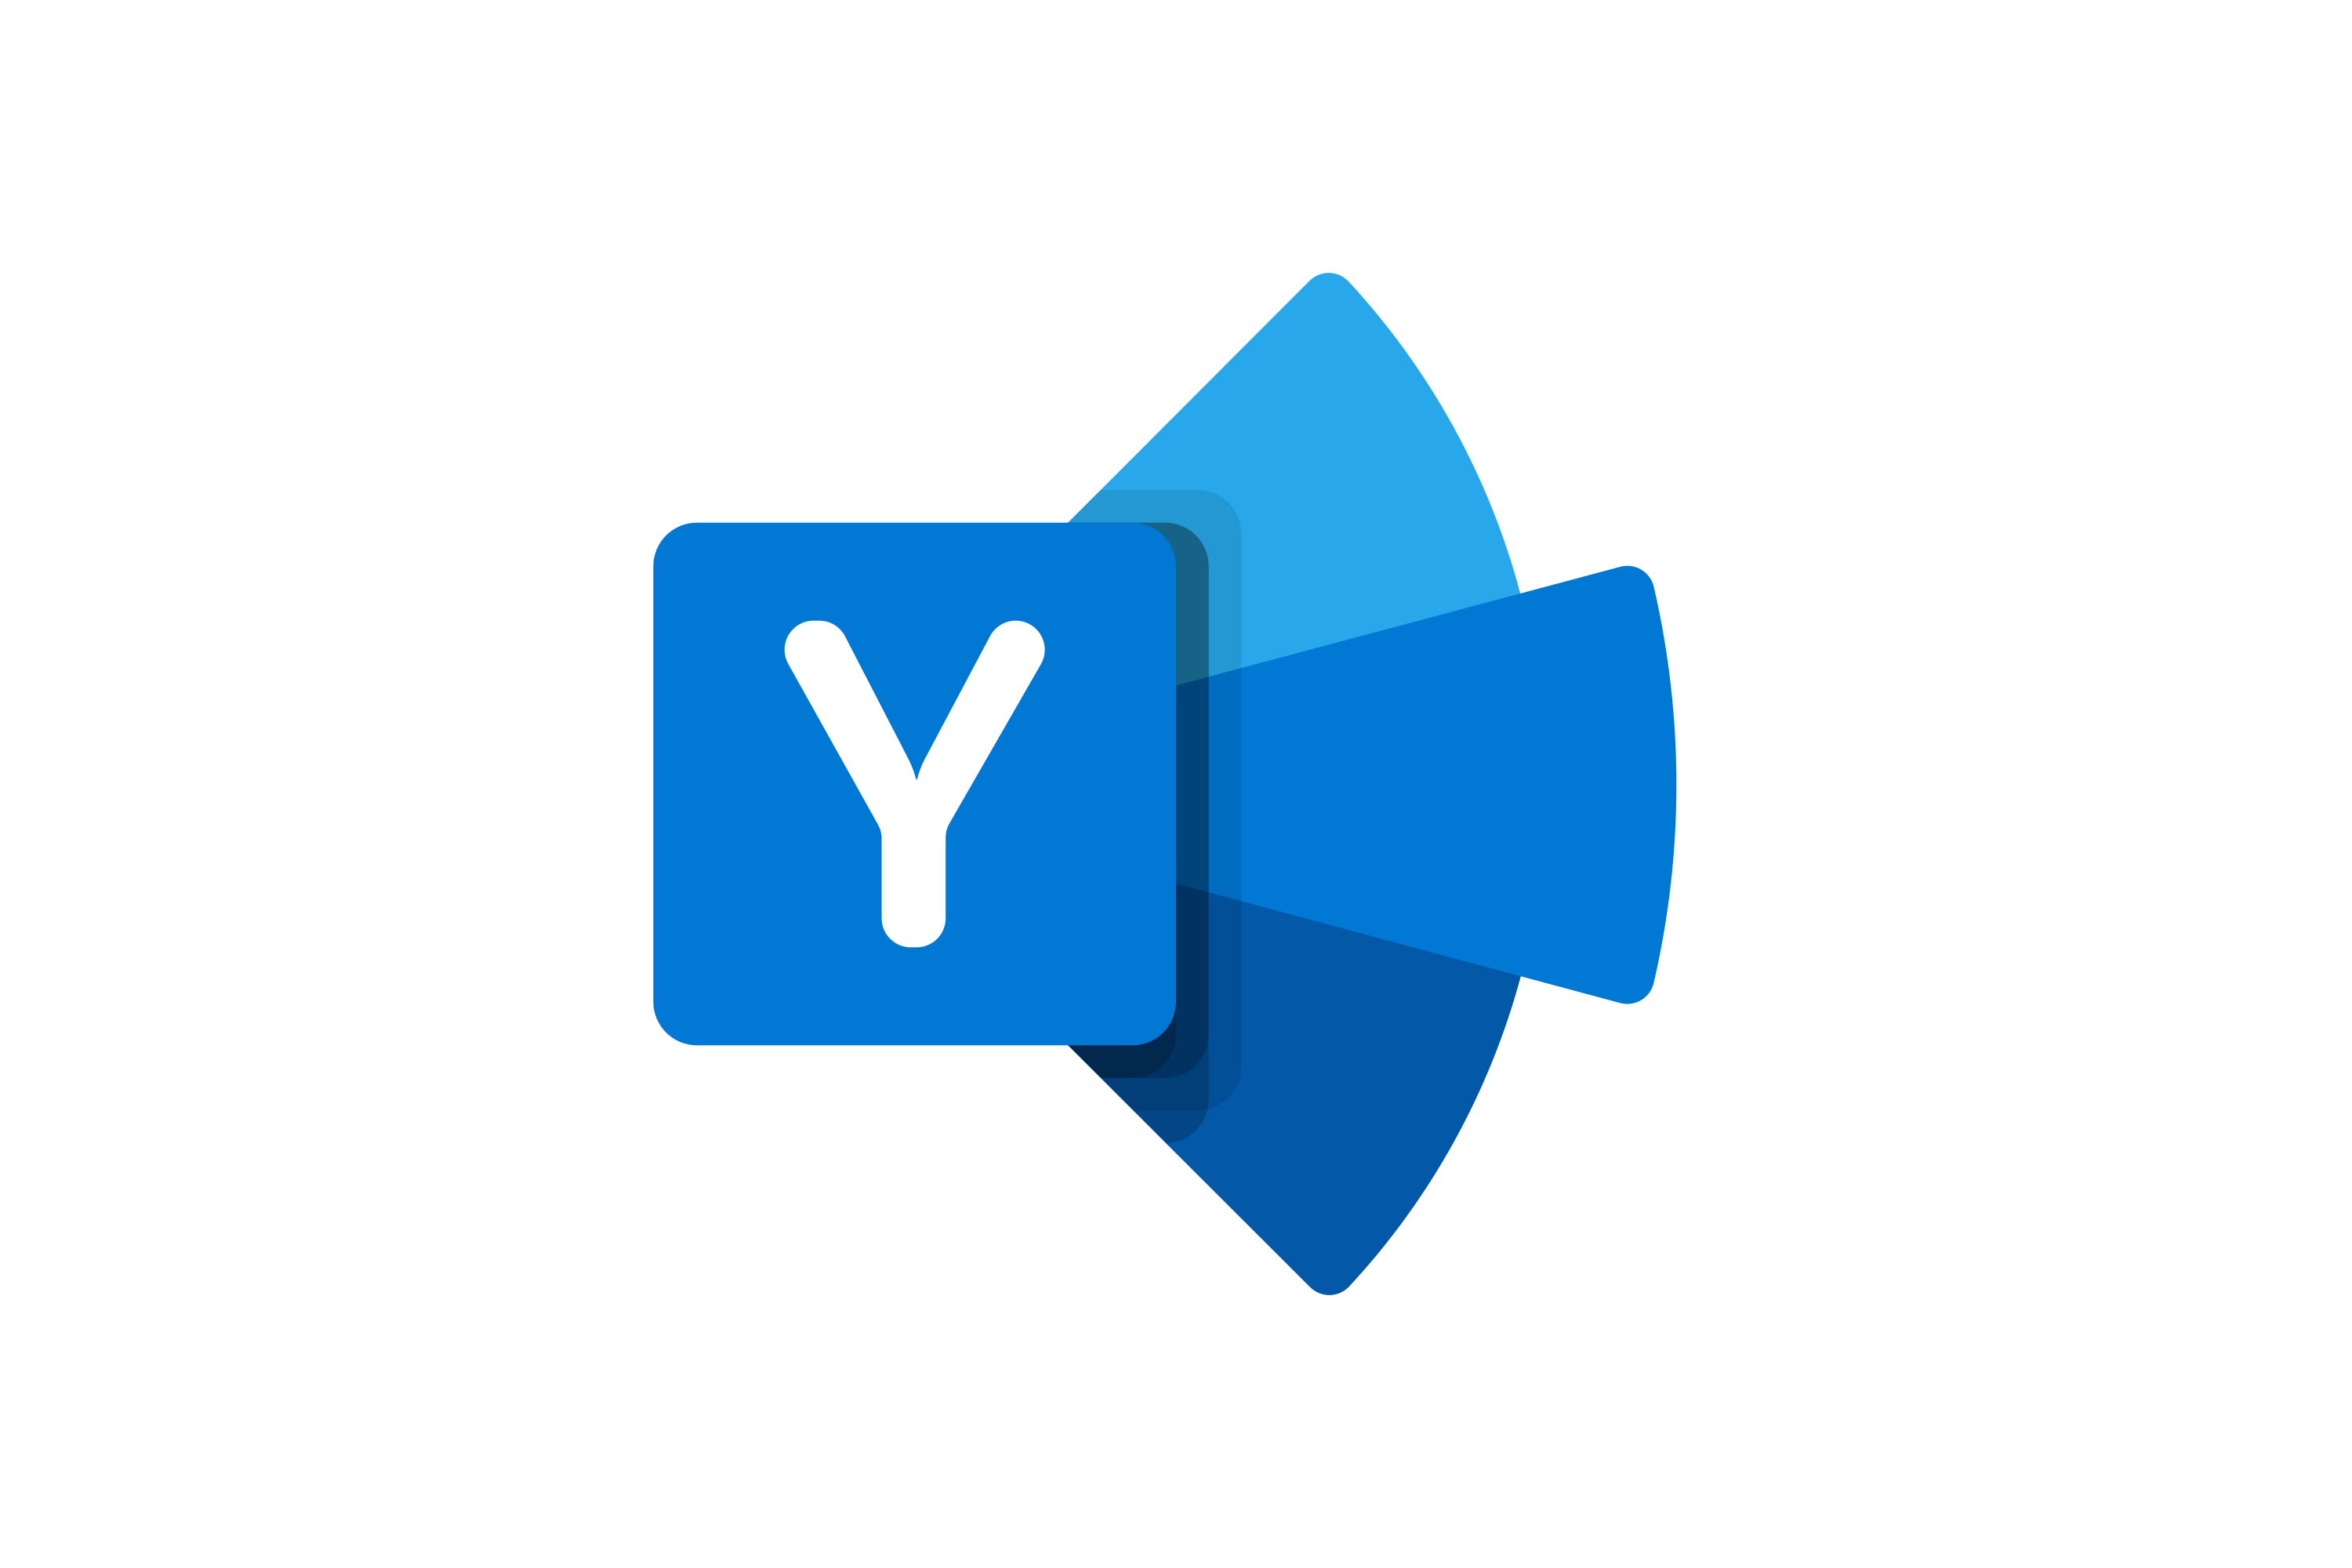 Download Yammer Logo In Svg Vector Or Png File Format   Logo.wine - Yammer, Transparent background PNG HD thumbnail